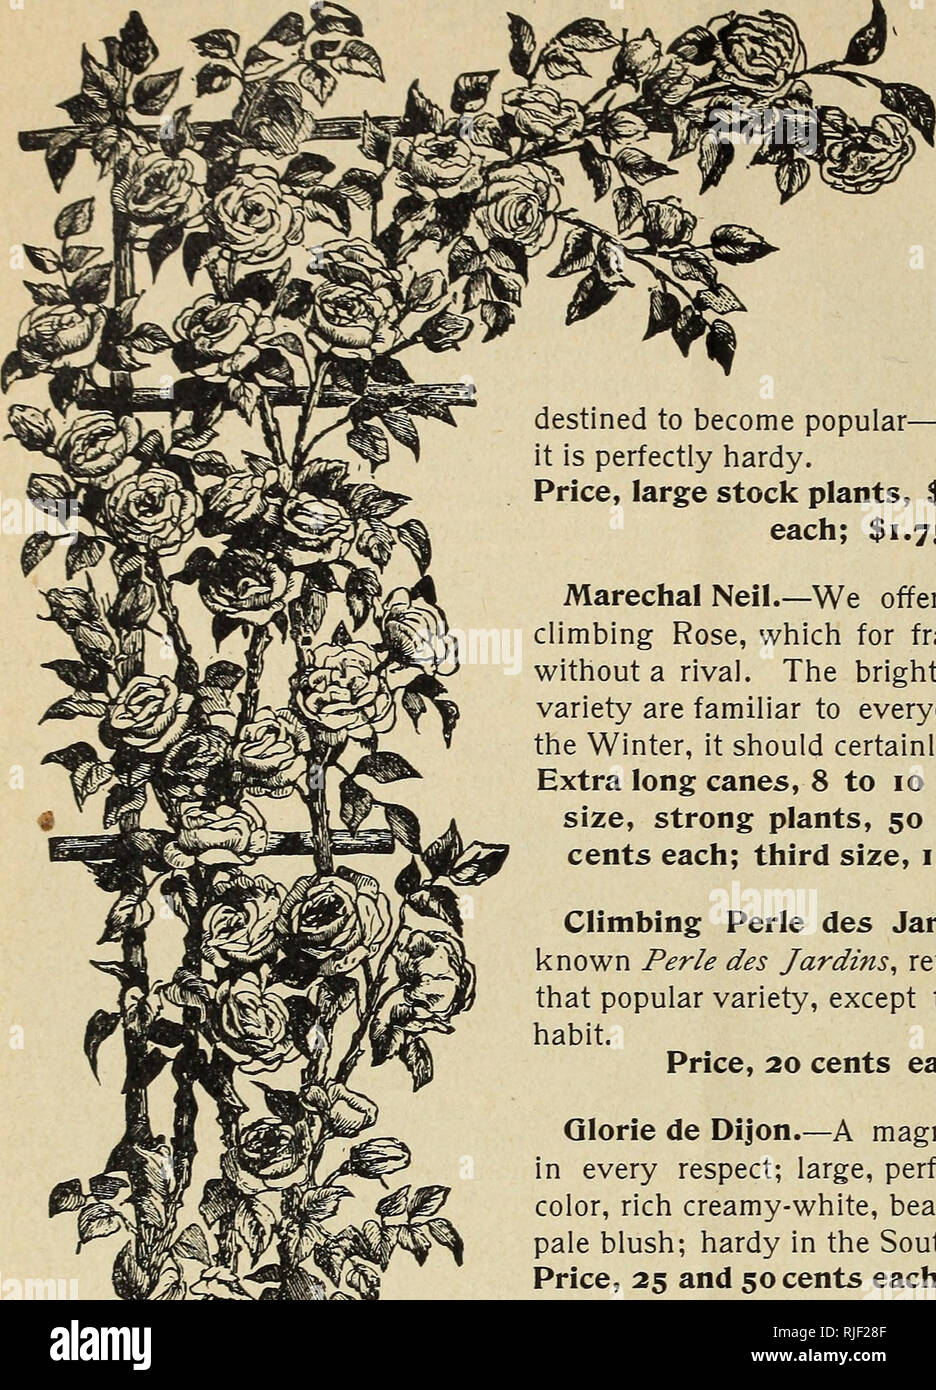 . Catalogue of seeds and plants. Nursery stock Colorado Denver Catalogs; Flowers Catalogs; Plants, Ornamental Catalogs. CLIMBING ROSES. Climbing Niphetos.— A sport from the dwarf &quot;Ni- phetos. &quot; It is a true climb- ing variety, having the same pure white, long-pointed buds as its parents, and is destined to become popular—in the South especially, where it is perfectly hardy. Price, large stock plants, $1.00 each; young plants, 20 each; $1.75 per dozen. Marechal Neil.—We offer a fine stock of this superior climbing Rose, which for fragrance, beauty and size is still without a rival. Th Stock Photo